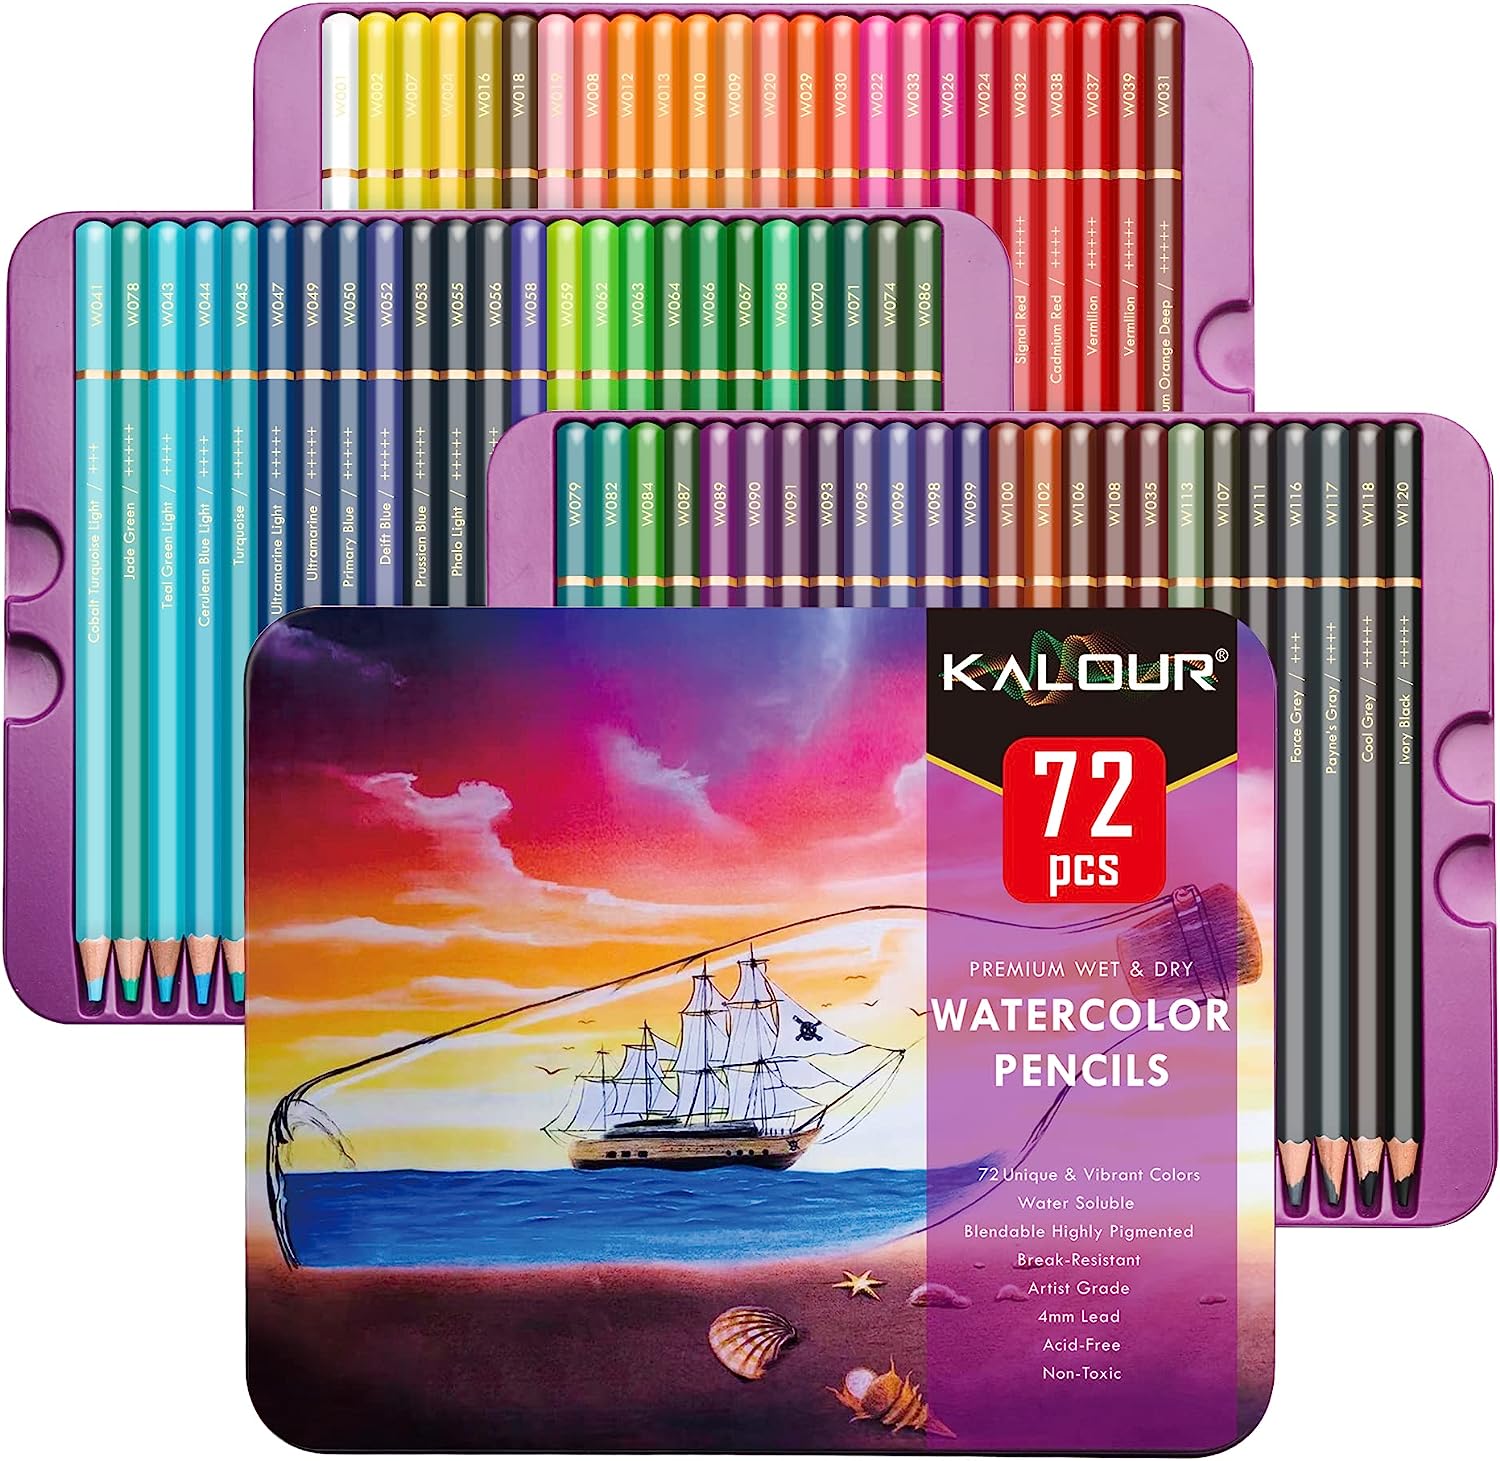 KALOUR Professional Watercolor Pencils, Set of 72 Colors,Numbered and Lightfastness,Water-soluble Colored Pencils for Adult Coloring Book,Water